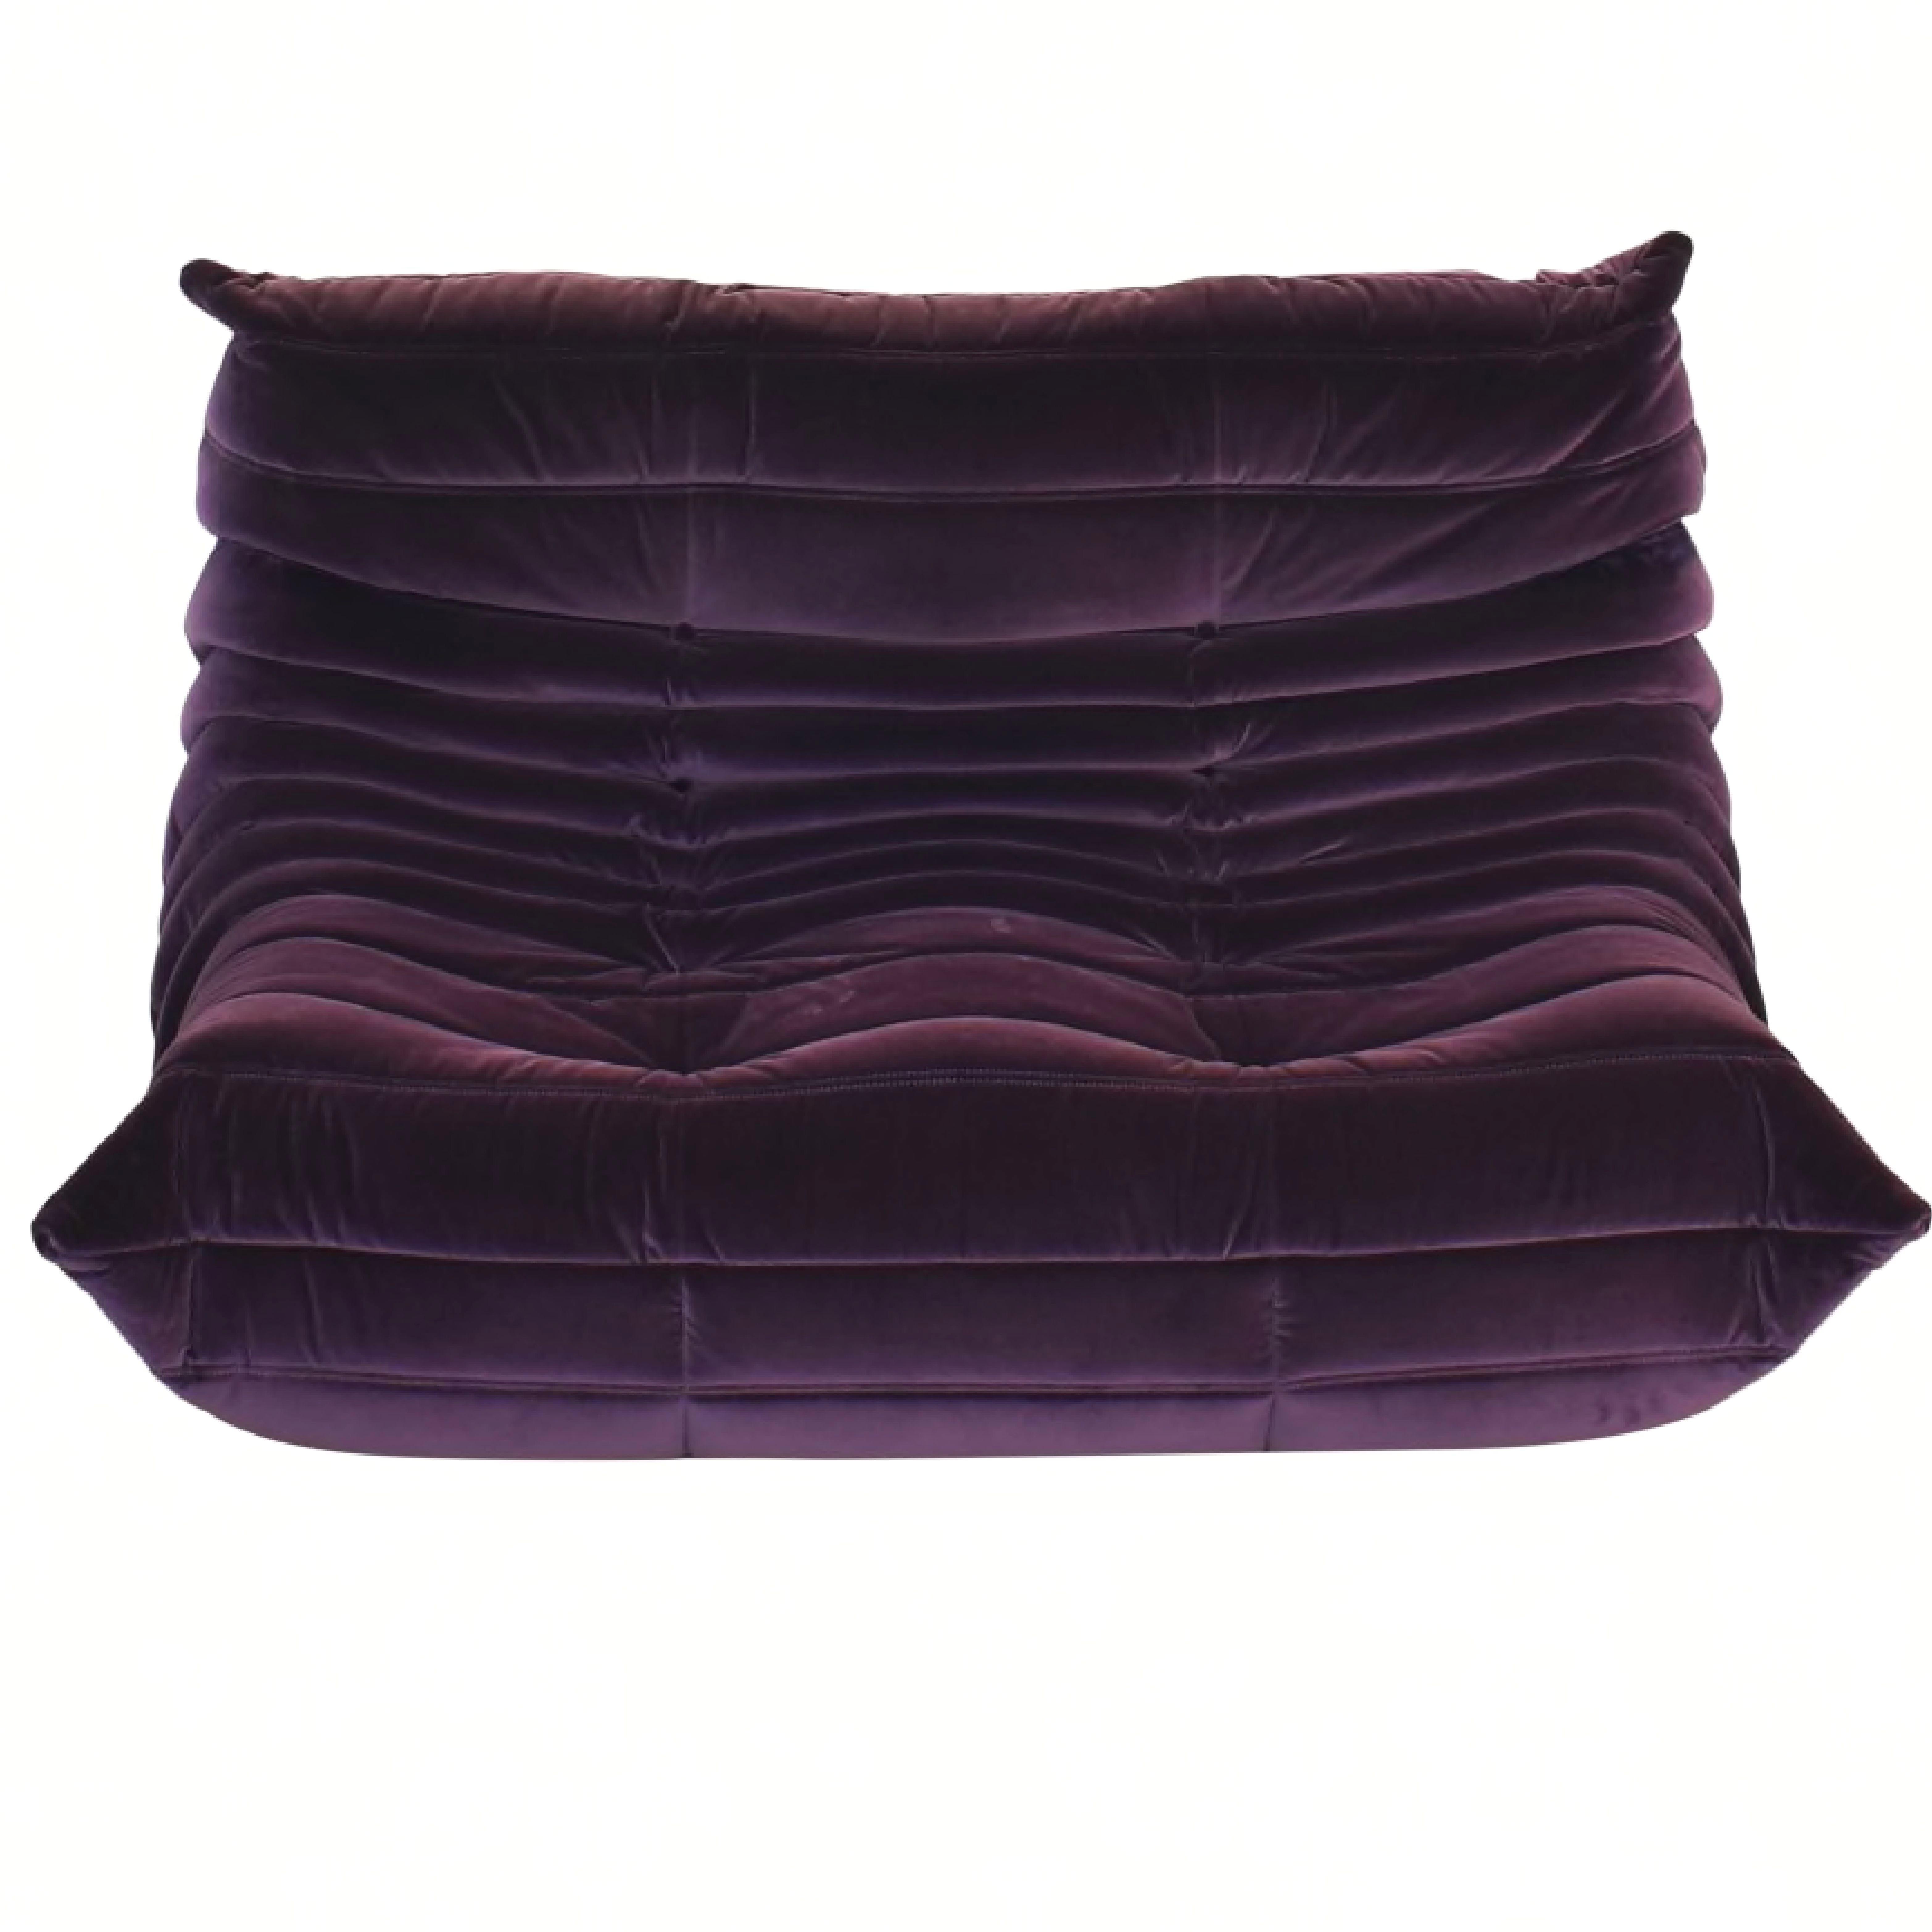 Michel Ducaroy for Ligne Roset Togo Loveseat Sofa, Herald Cassis Purple Velvet. Characteristics
A Ligne Roset classic, Michel Ducaroy's Togo has been the ultimate in comfort and style for over forty years. The timeless collection features an